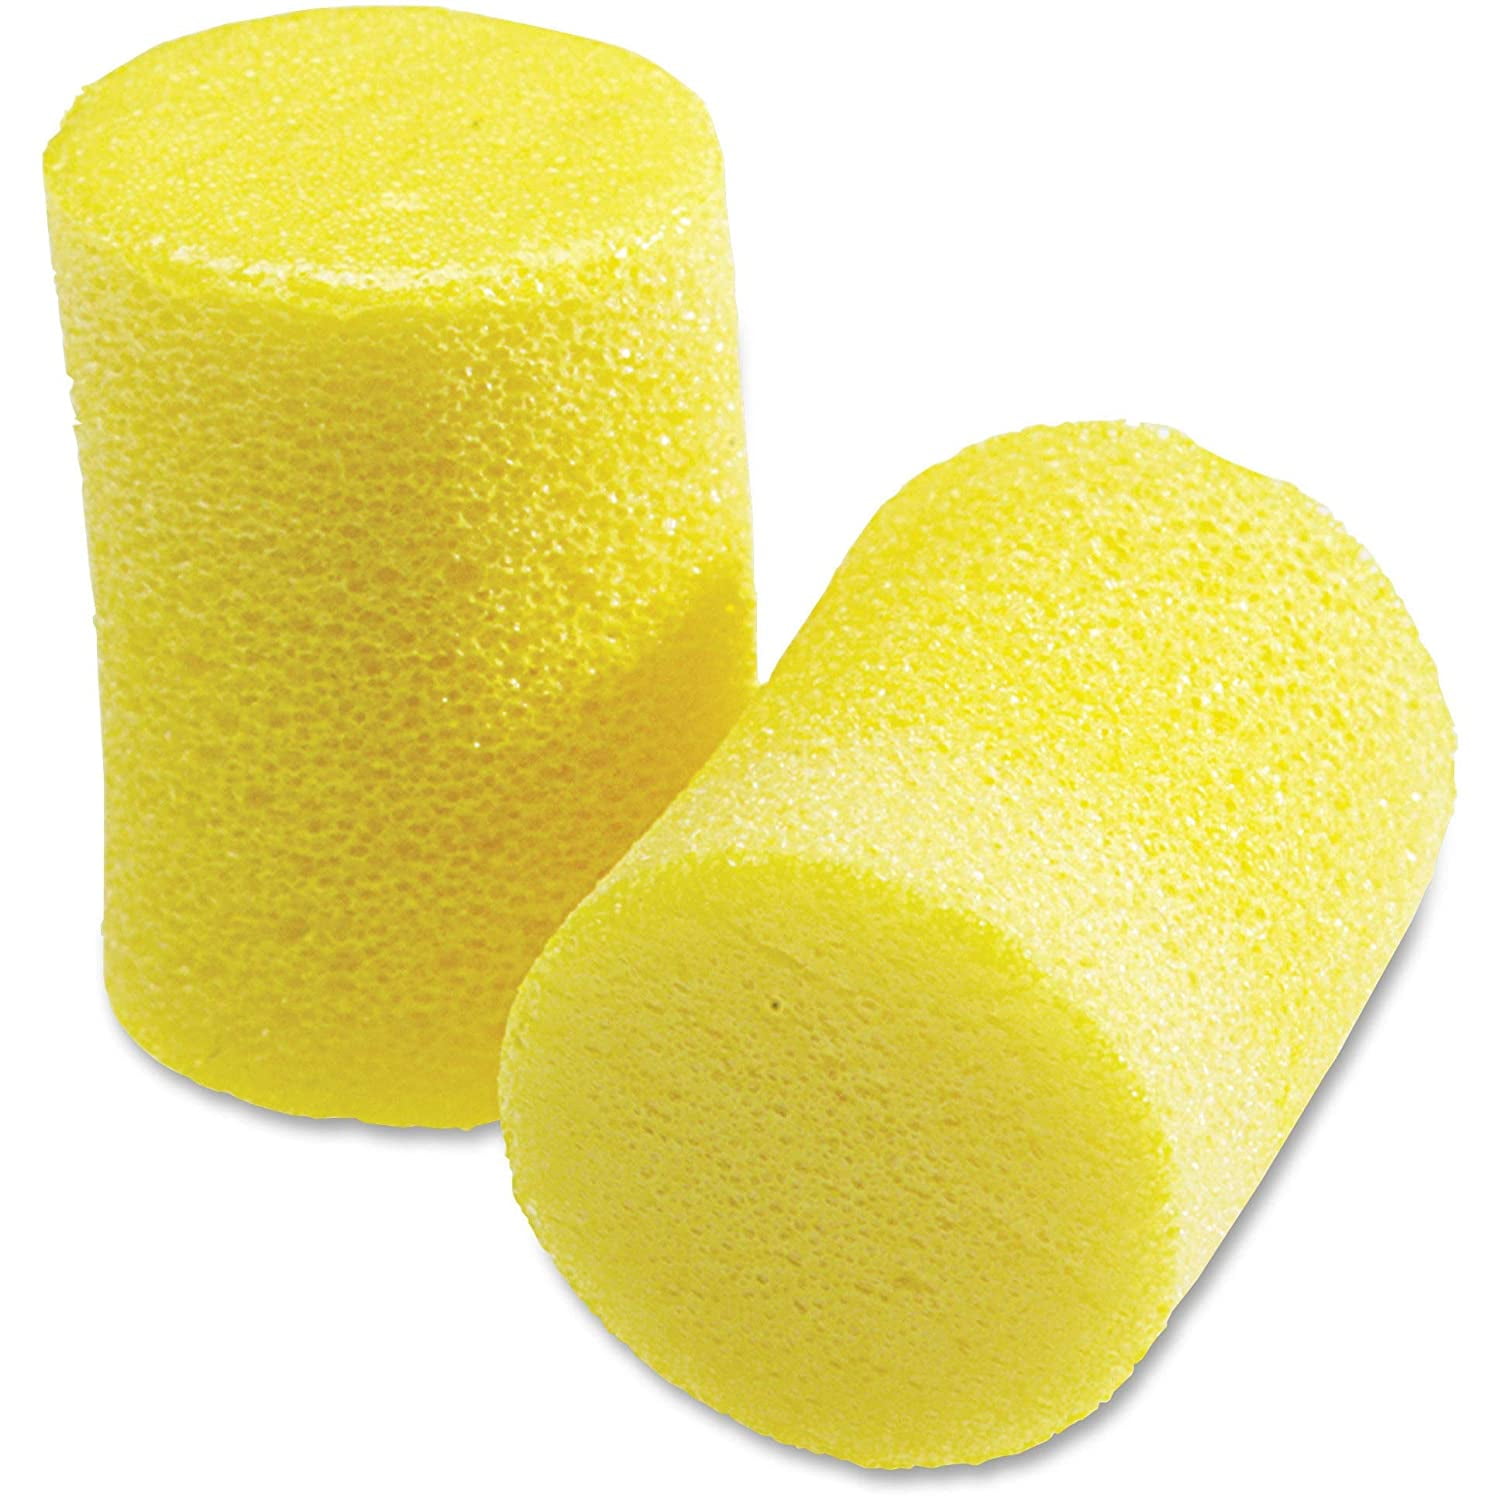 for sale online 200 Pair Yellow 3M 312-1201 E-A-R Classic Earplug 